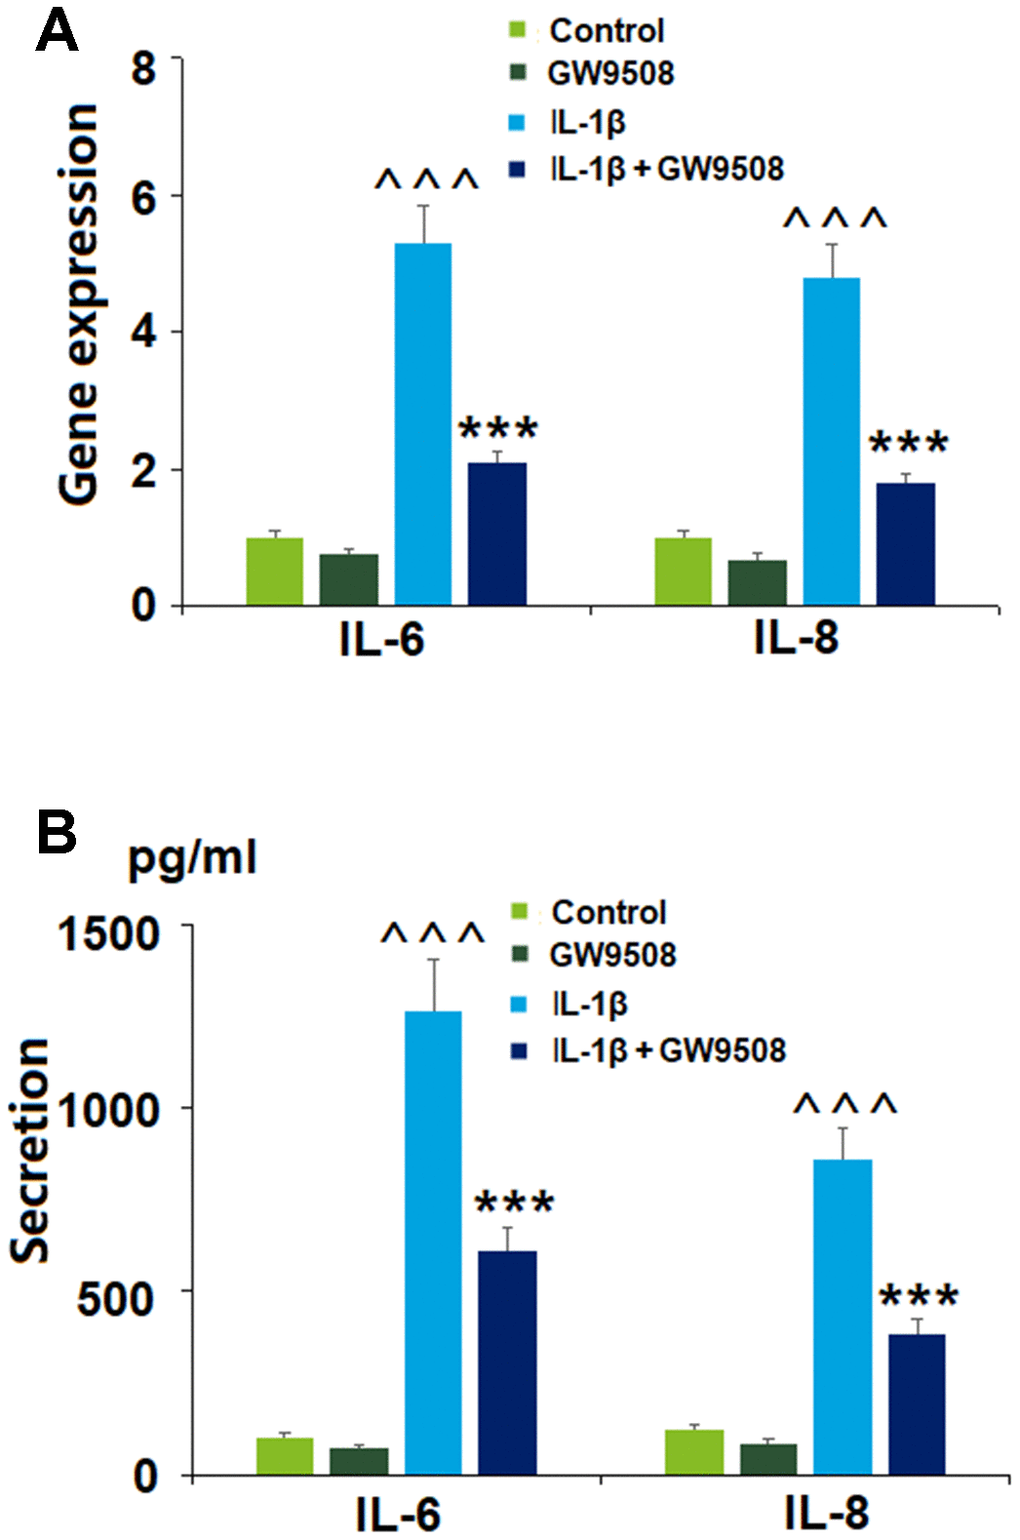 Treatment with GW9508 reduced IL-1β-induced generation of inflammatory cytokines in ATDC5 chondrocytes. Cells were treated with IL-1β (10 ng/ml) with or without GW9508 (50 μM) for 24 h. (A). mRNA of IL-6 and IL-8; (B). Protein secretions of IL-6 and IL-8 (^^^, P